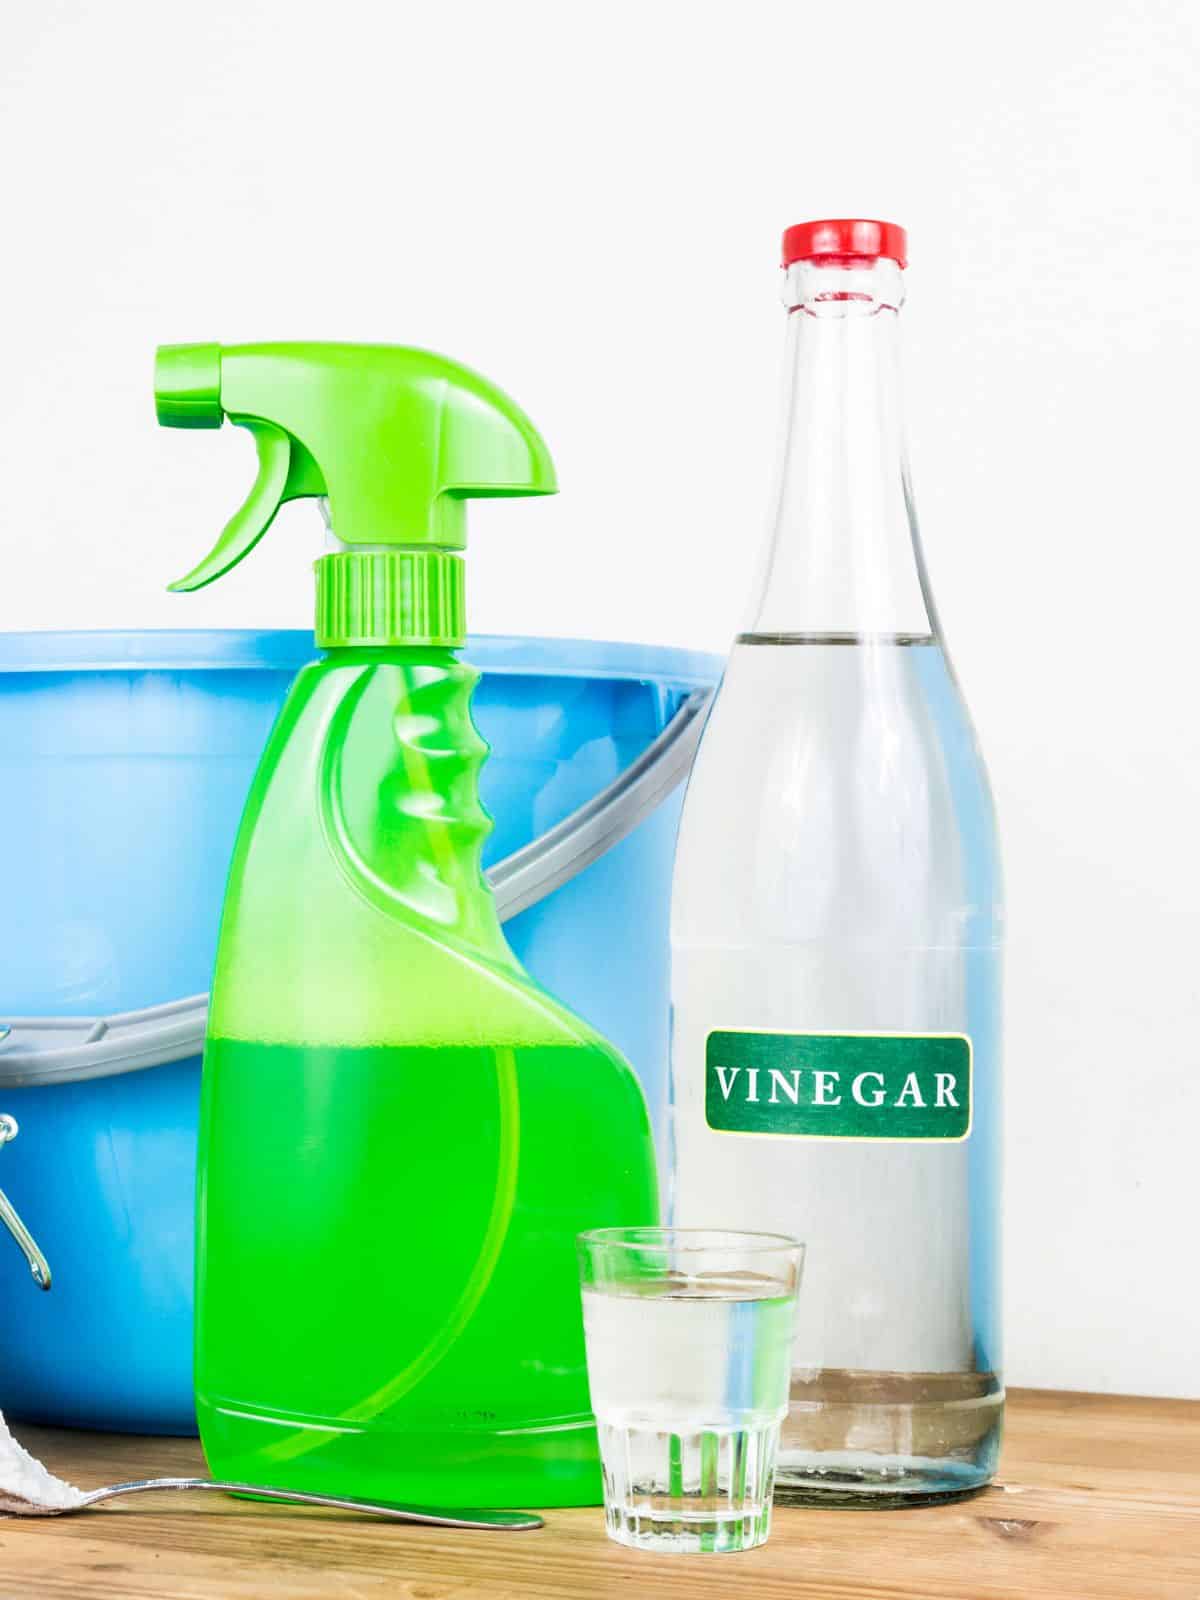 A bottle of vinegar, spray bottle, a glass of water and a bucket on a wooden table.